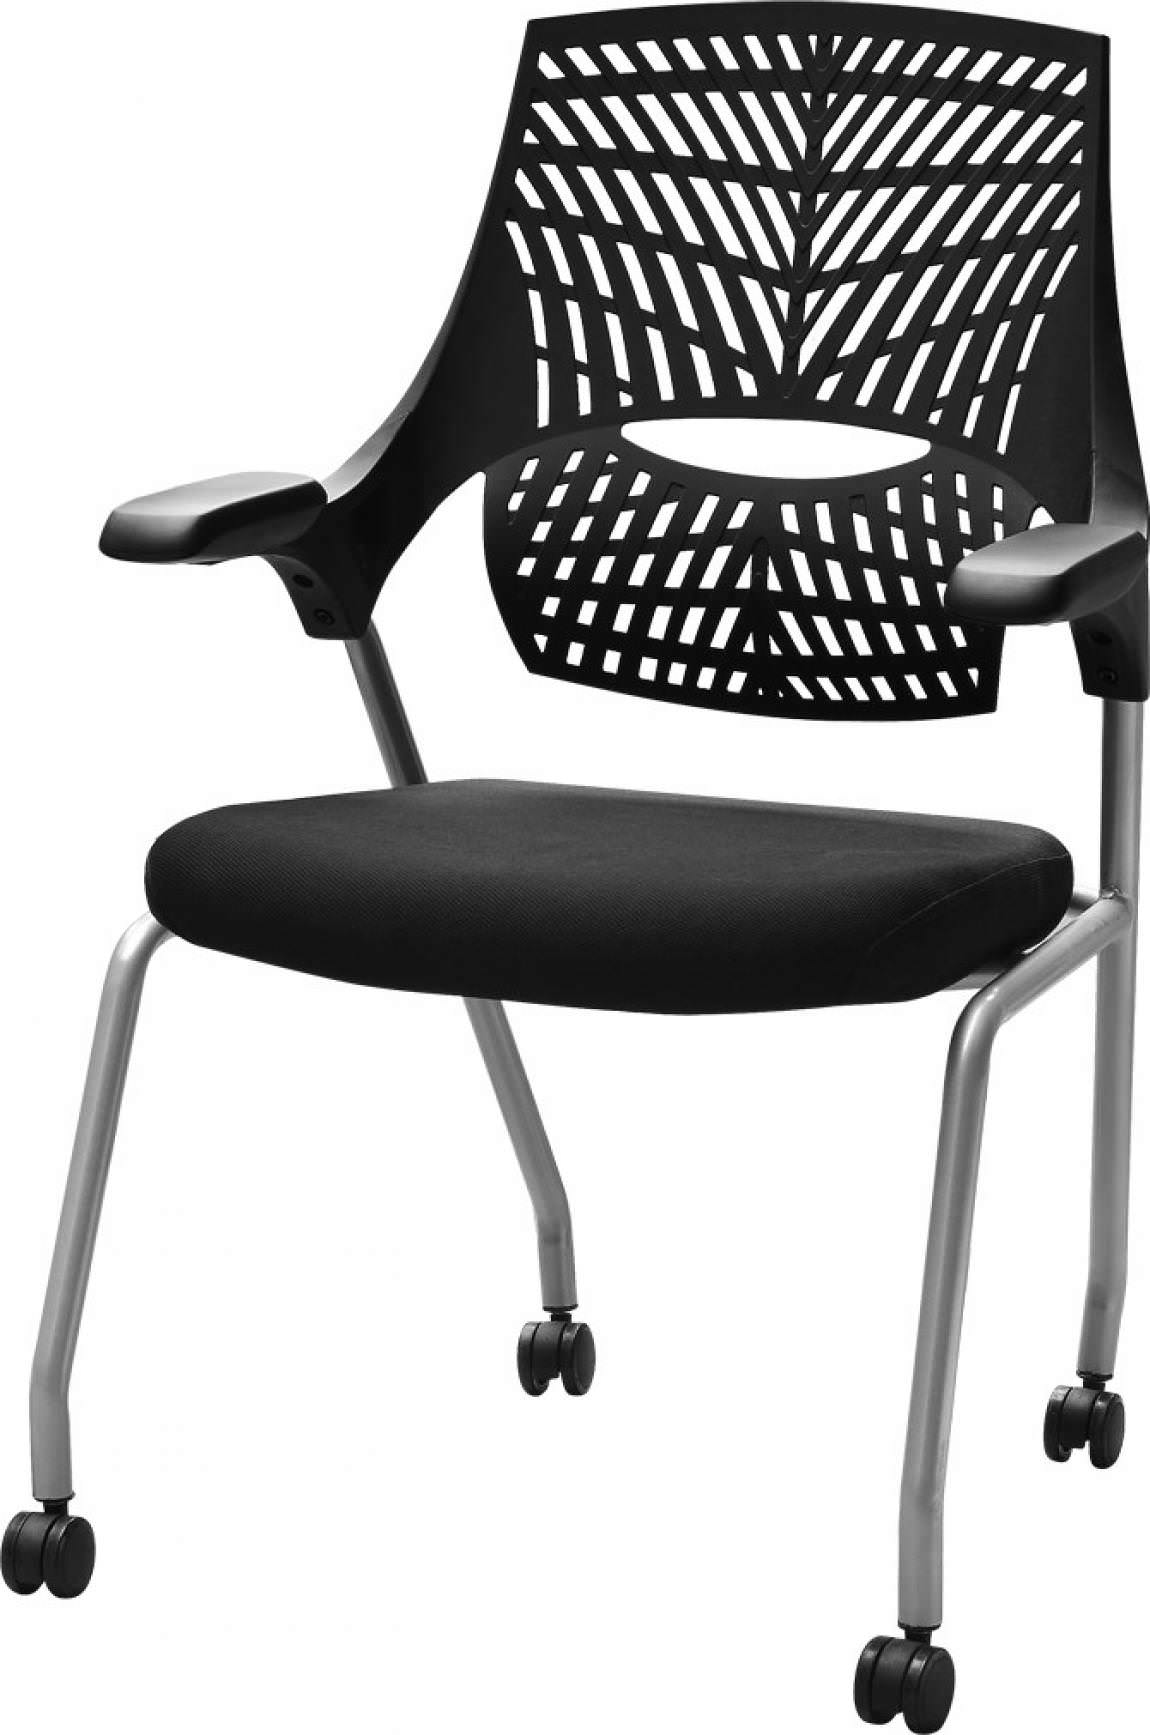 Black Nesting GW Flex Support Chair on Casters